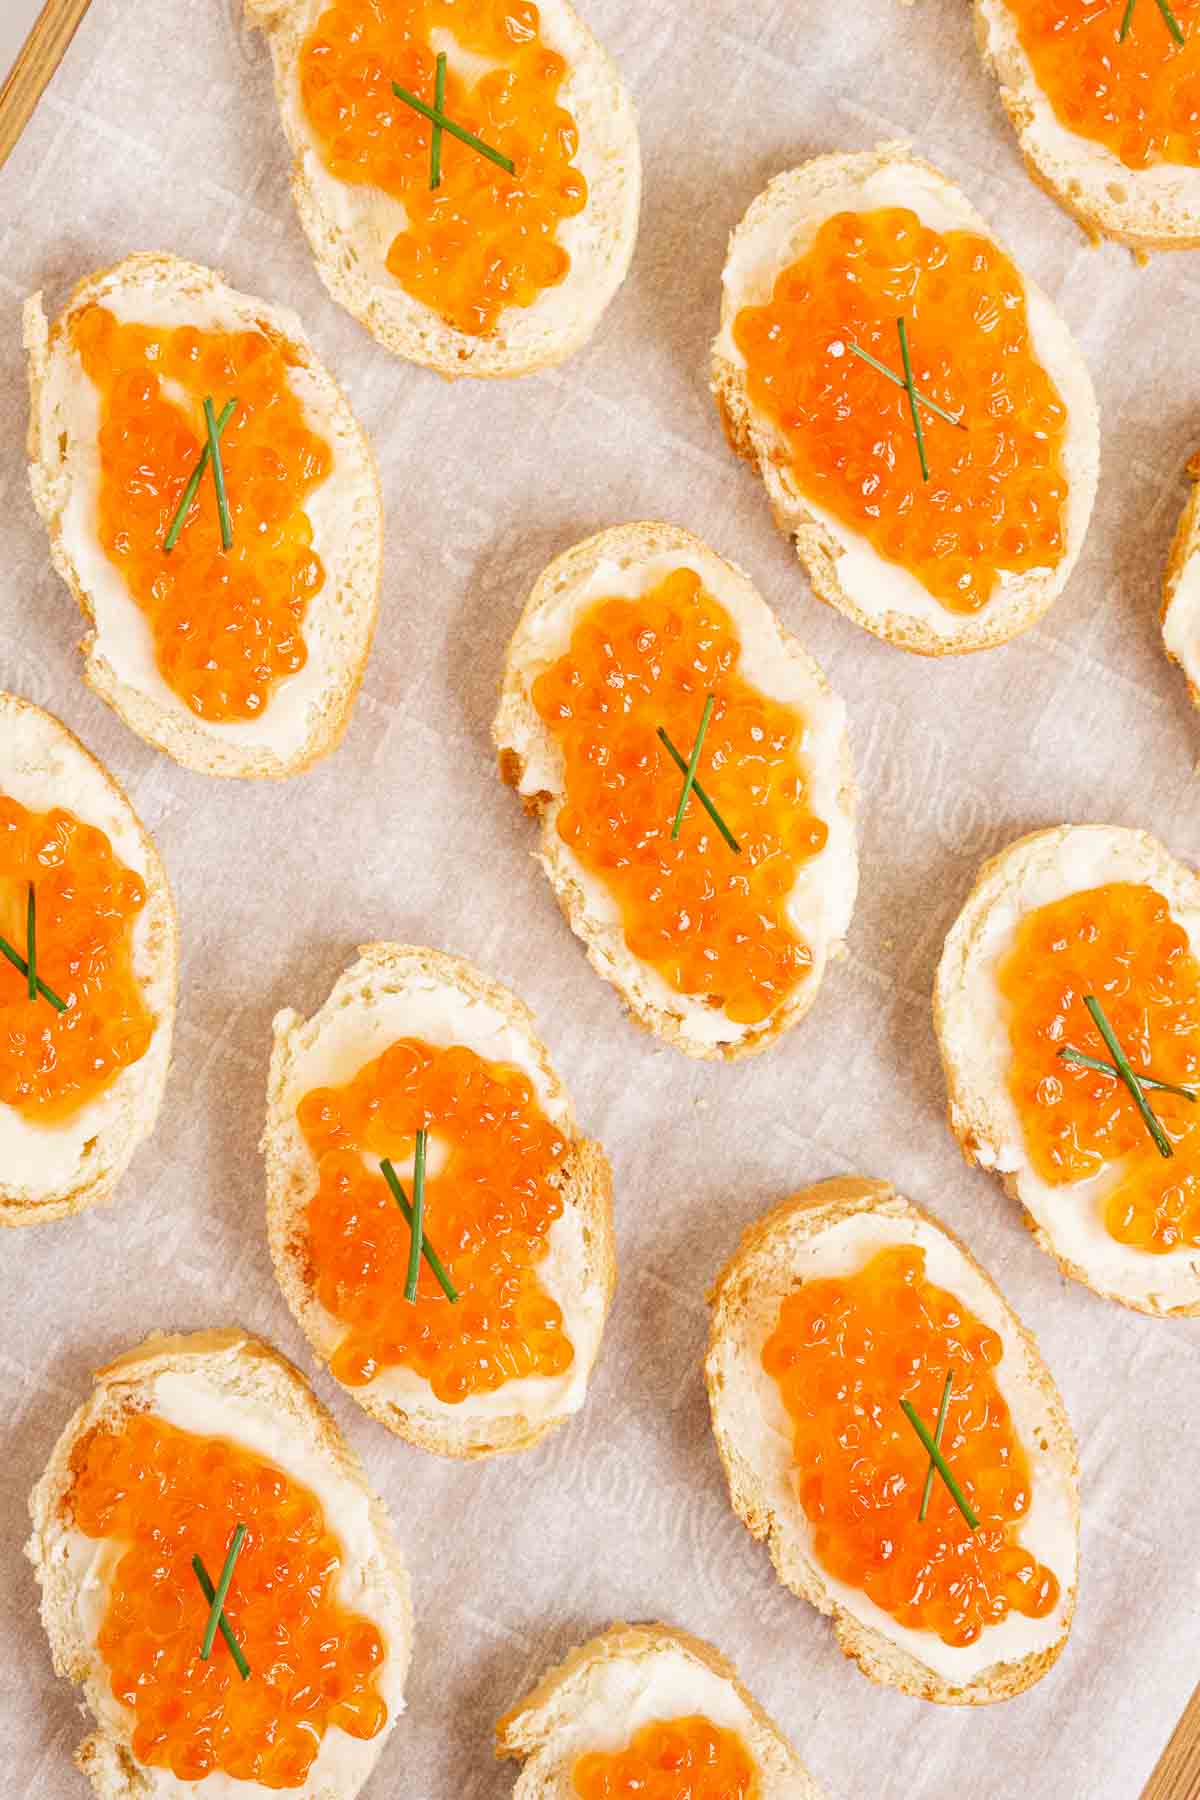 Red caviar toasts with chive garnish